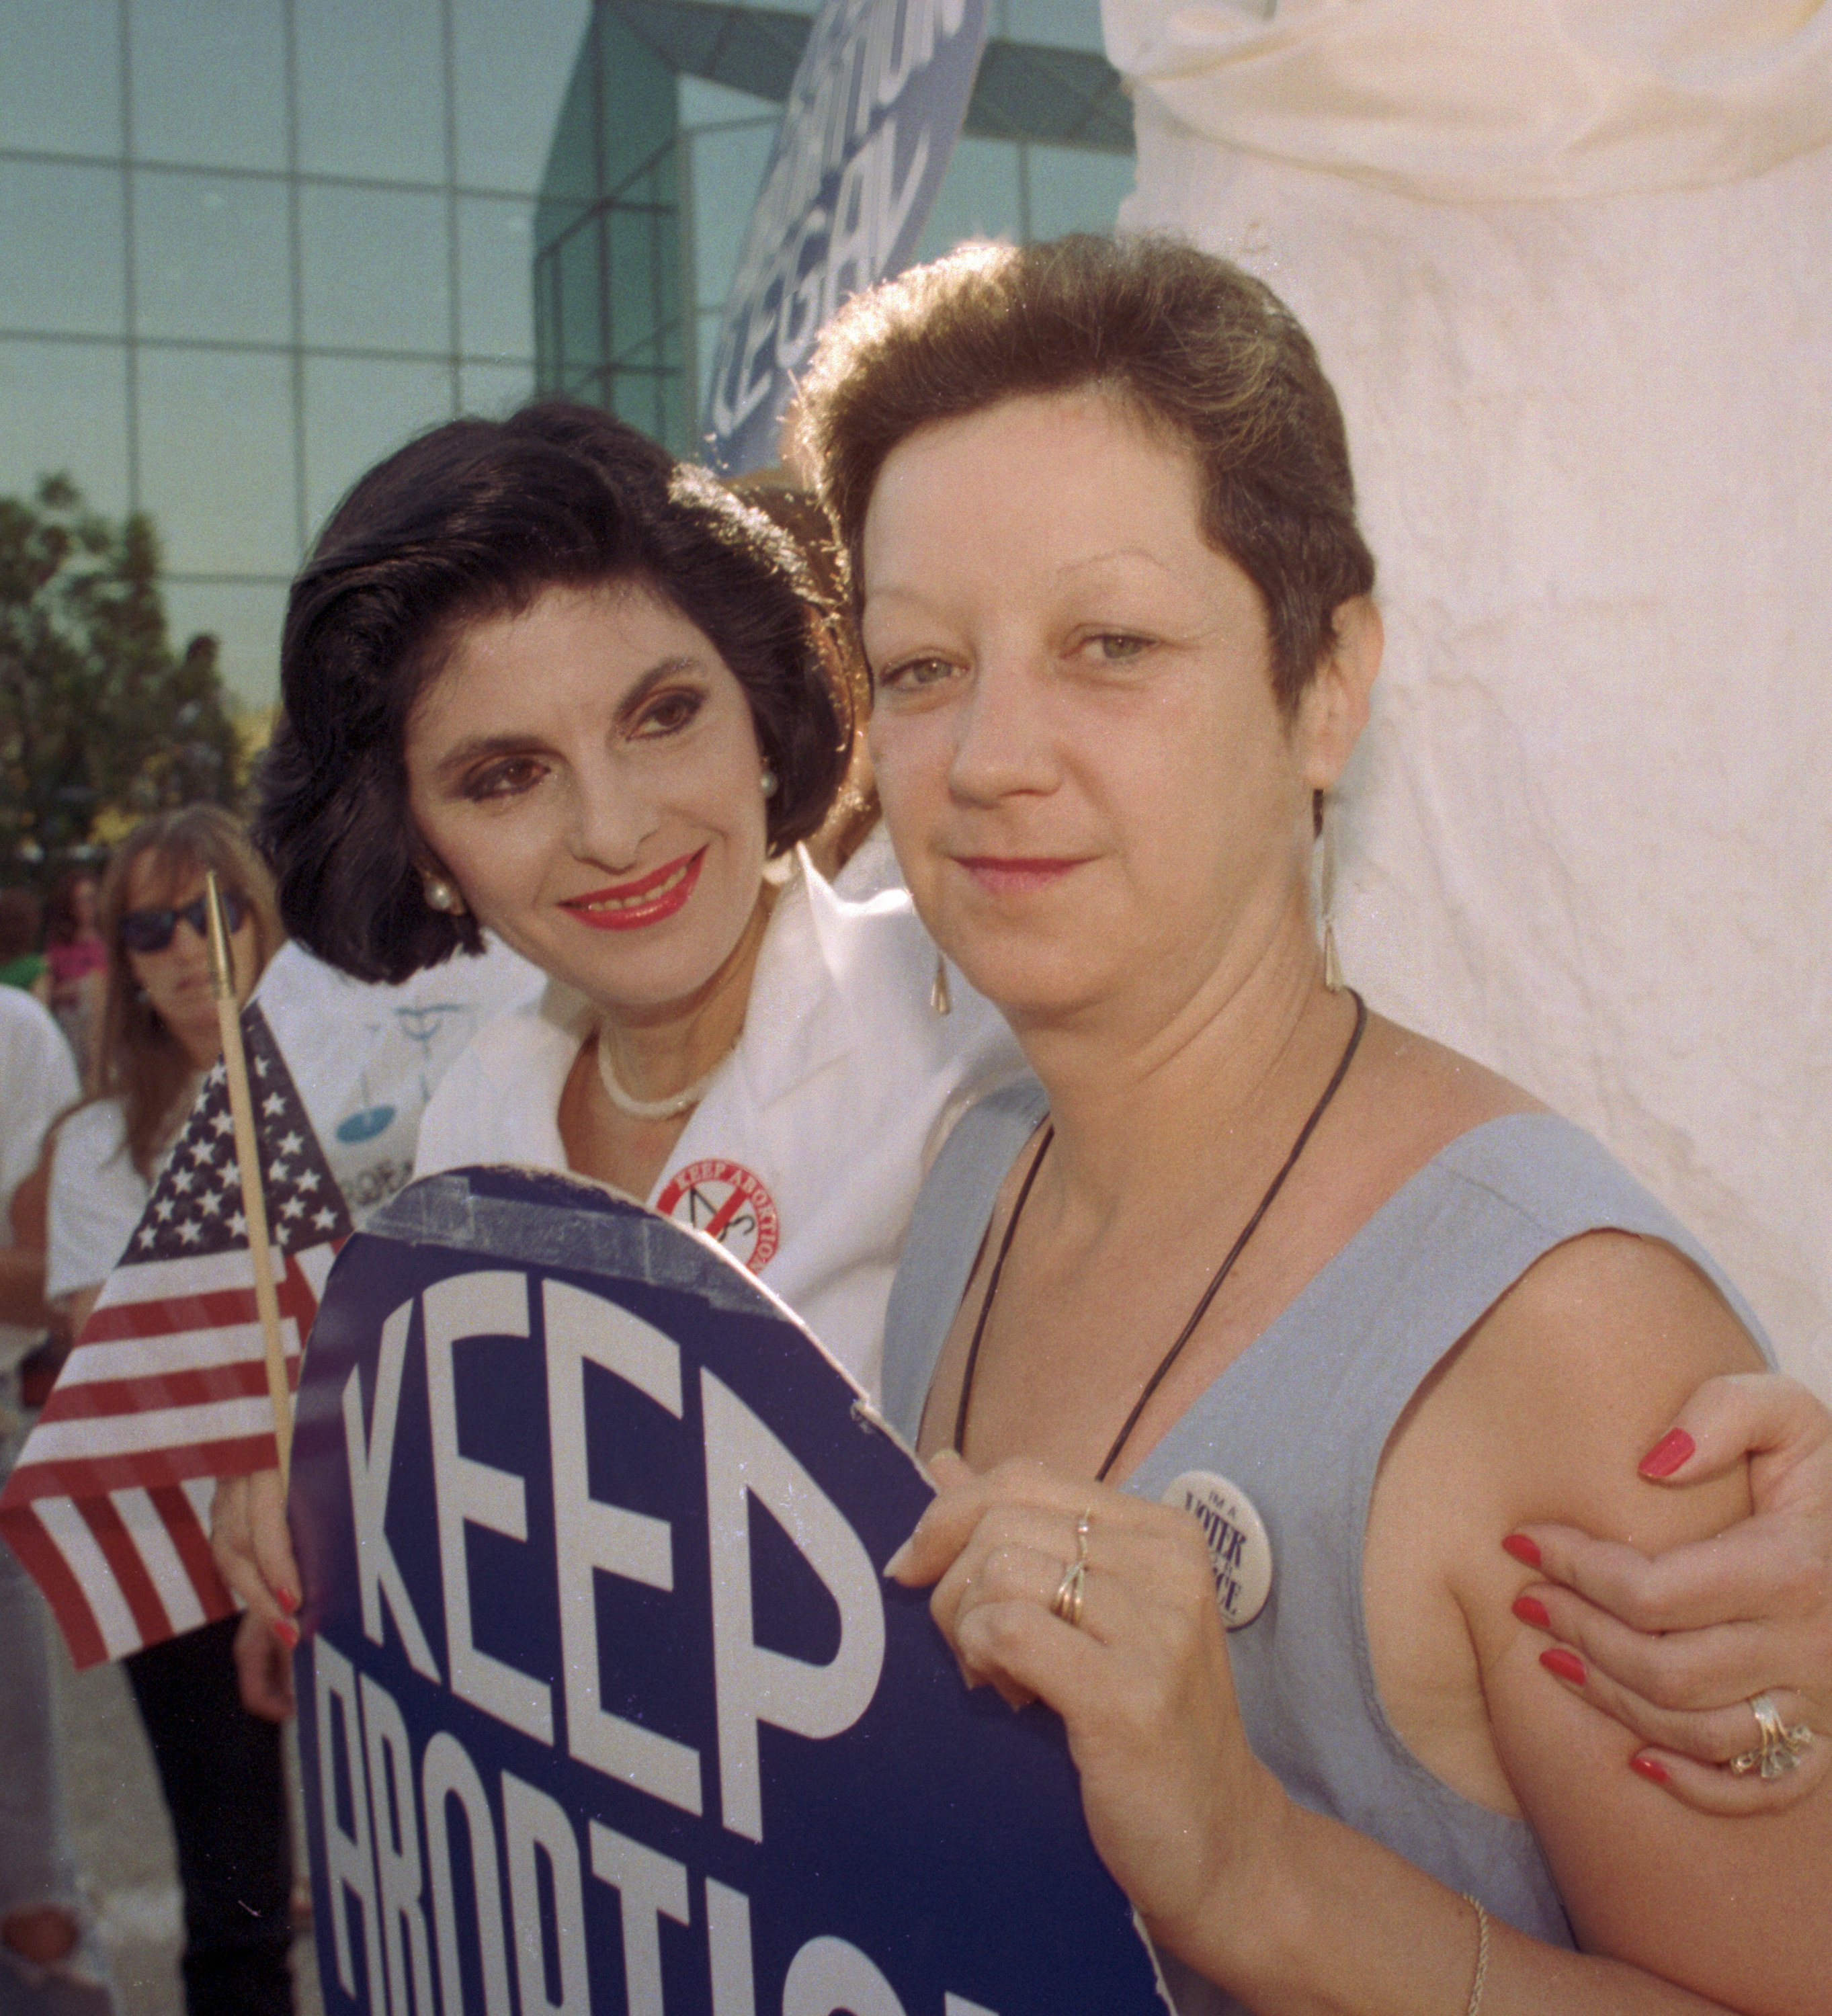 Attorney Gloria Allred and Norma McCorvey at a Pro Choice Rally in Burbank, California 1989